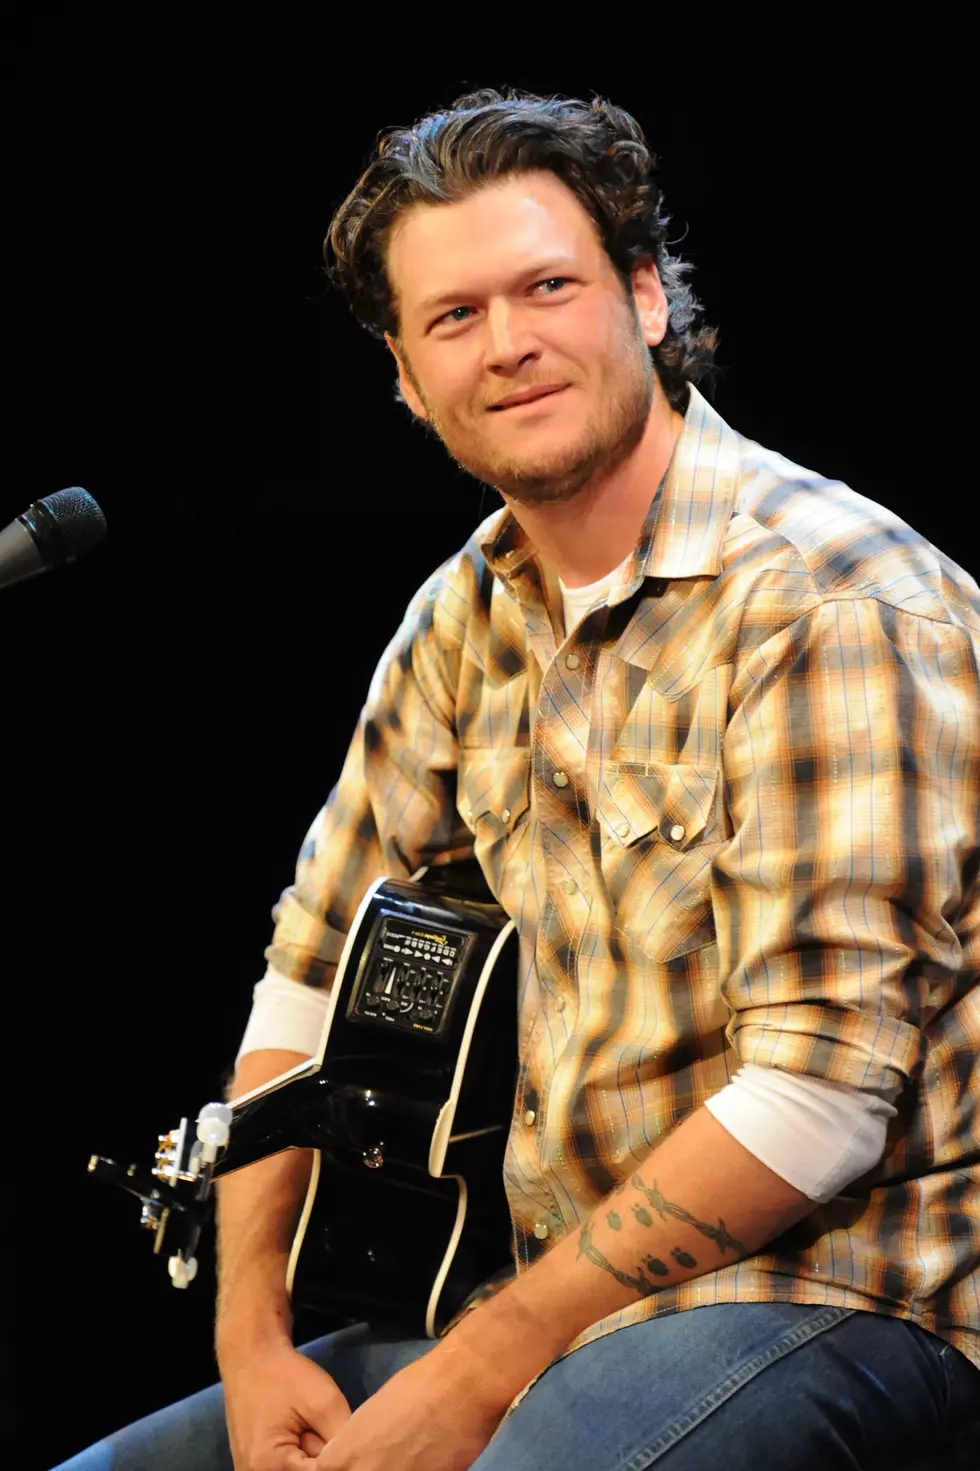 Blake Shelton Did Alan Jackson Justice With This Electric Cover of 'Dallas